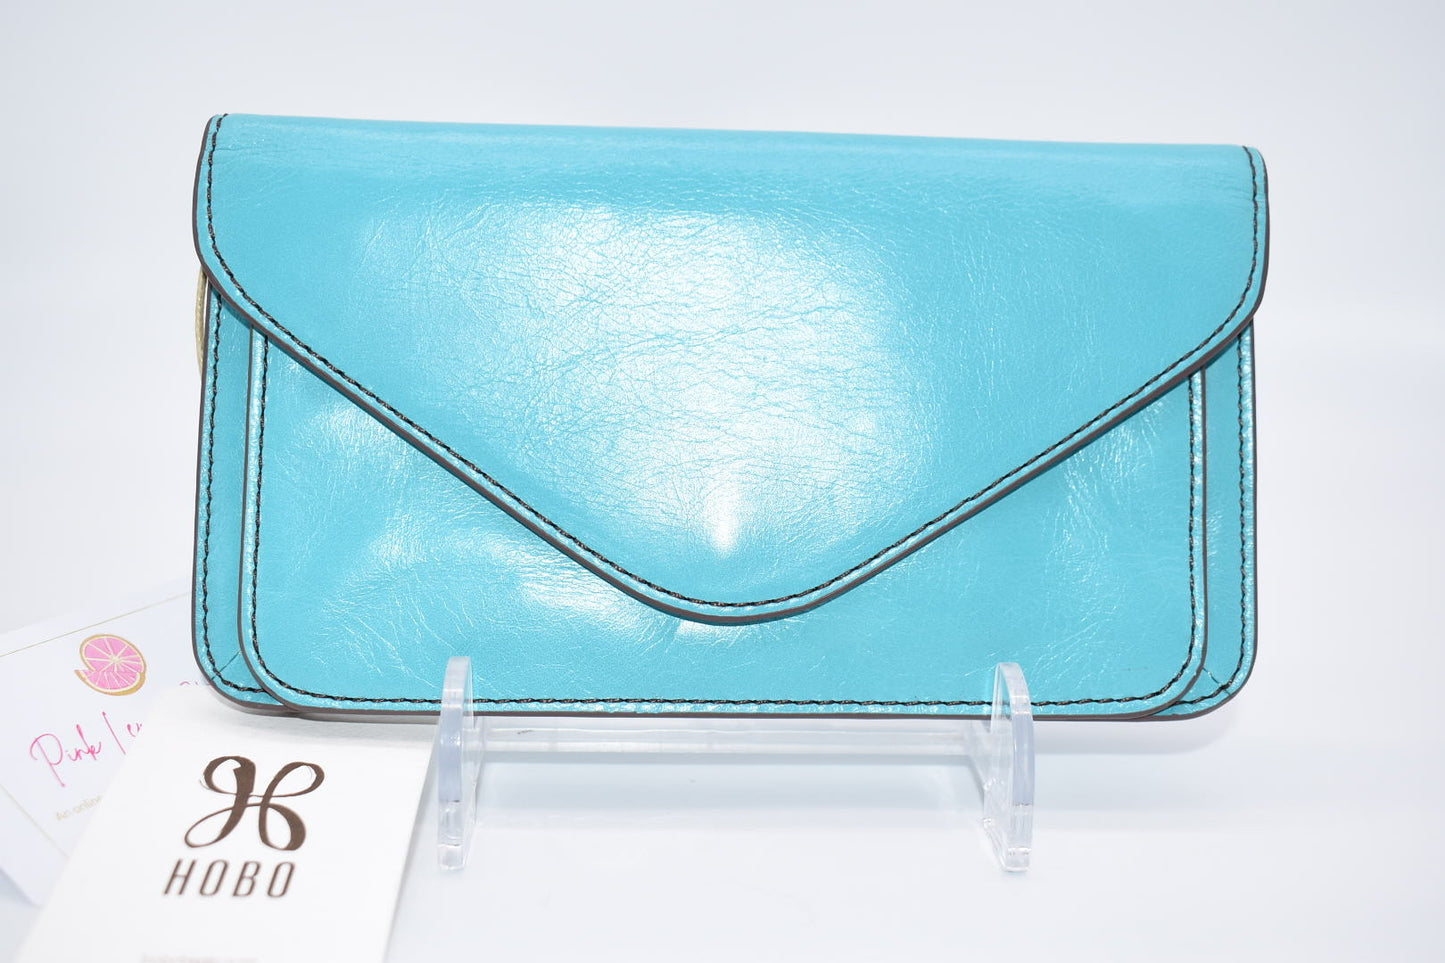 HOBO Ford Leather Wallet in Aqua